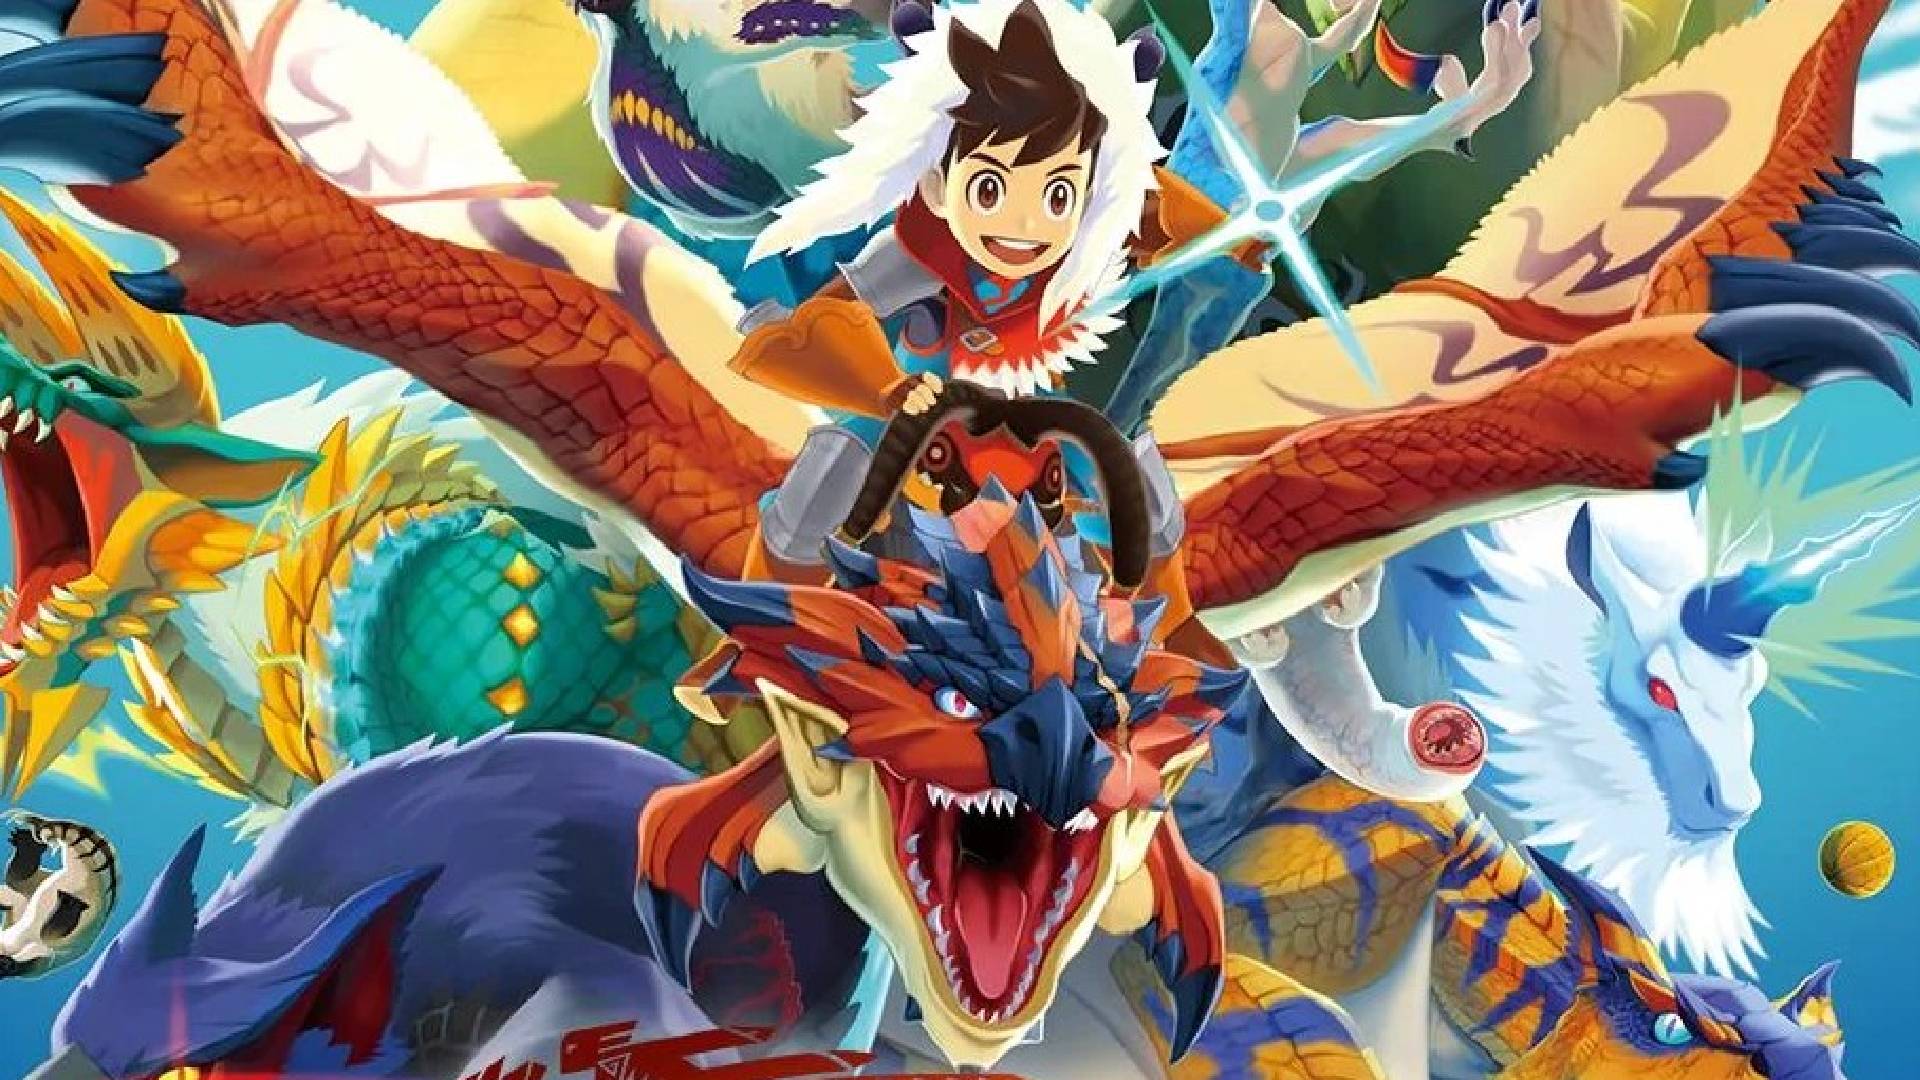 Monster Hunter Stories 2 review - charming blend of hunting and RPG  mechanics